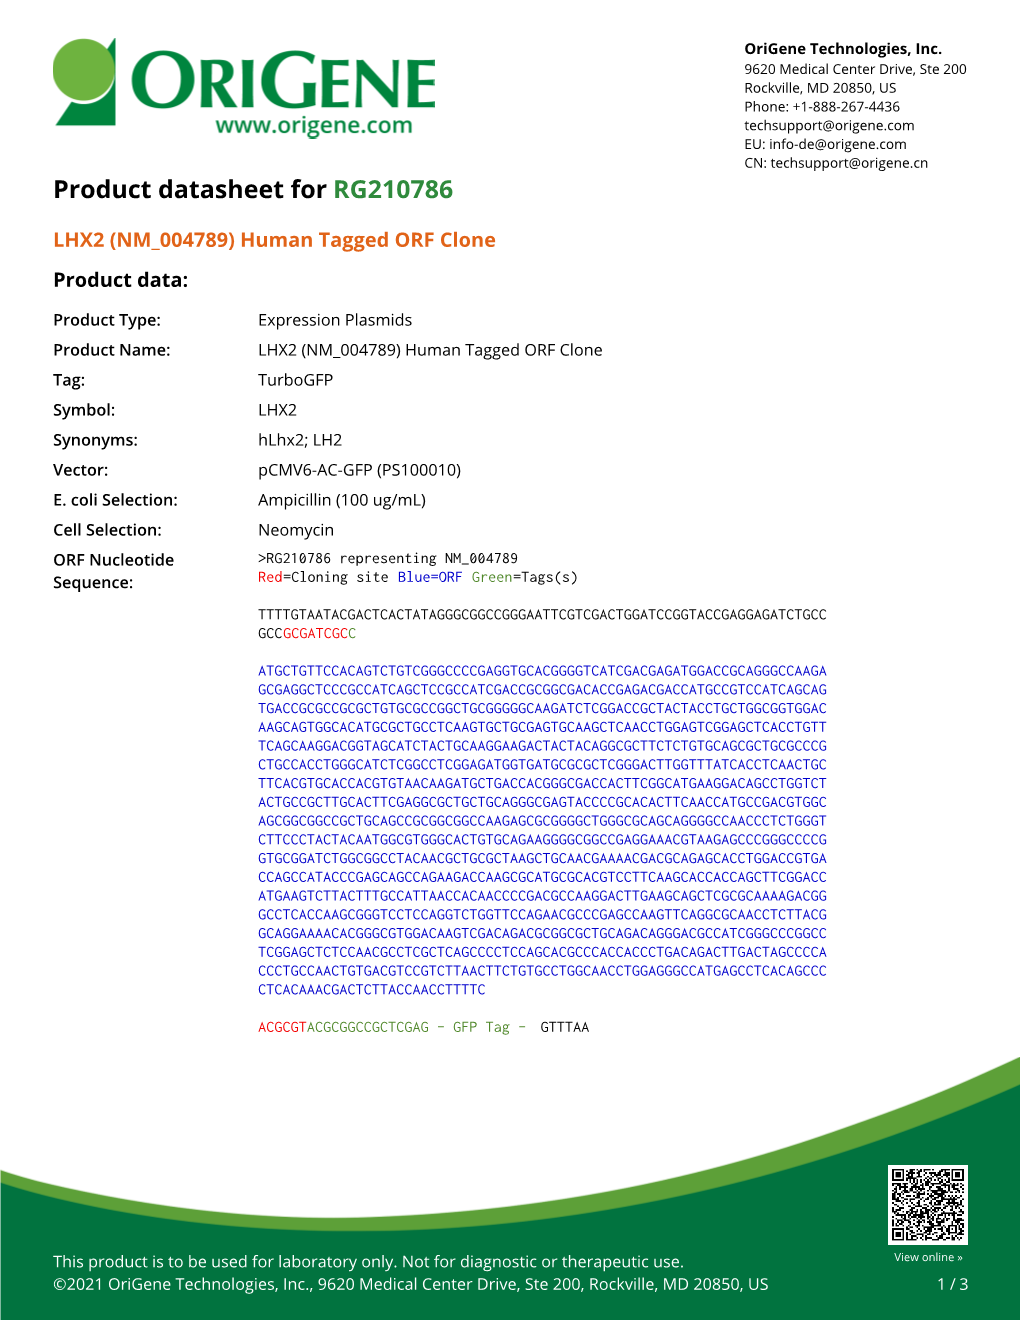 LHX2 (NM 004789) Human Tagged ORF Clone Product Data